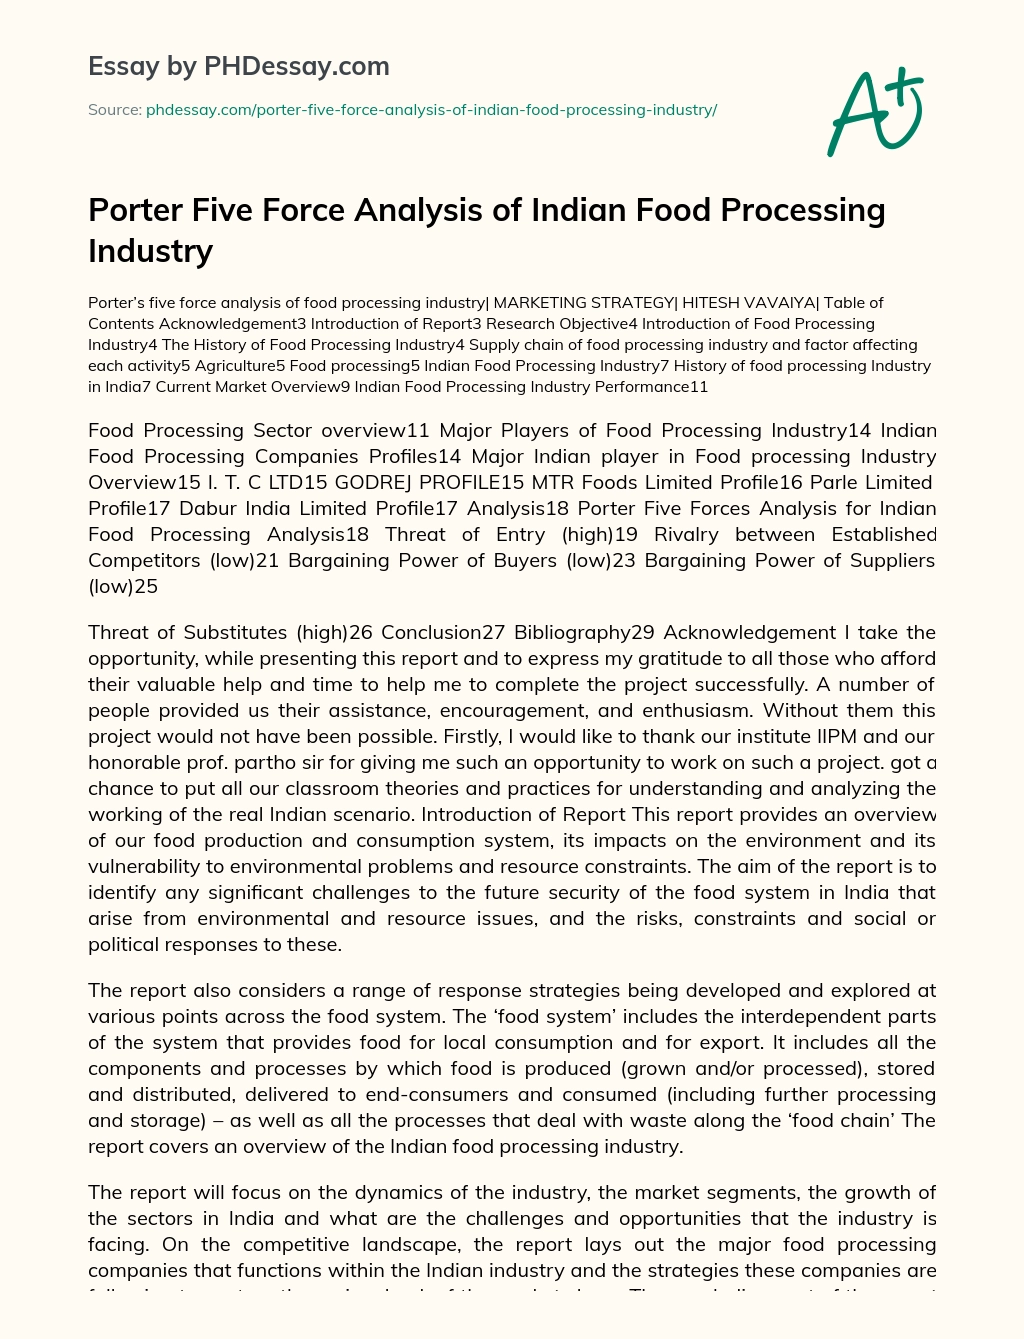 swot analysis of food processing industry in india